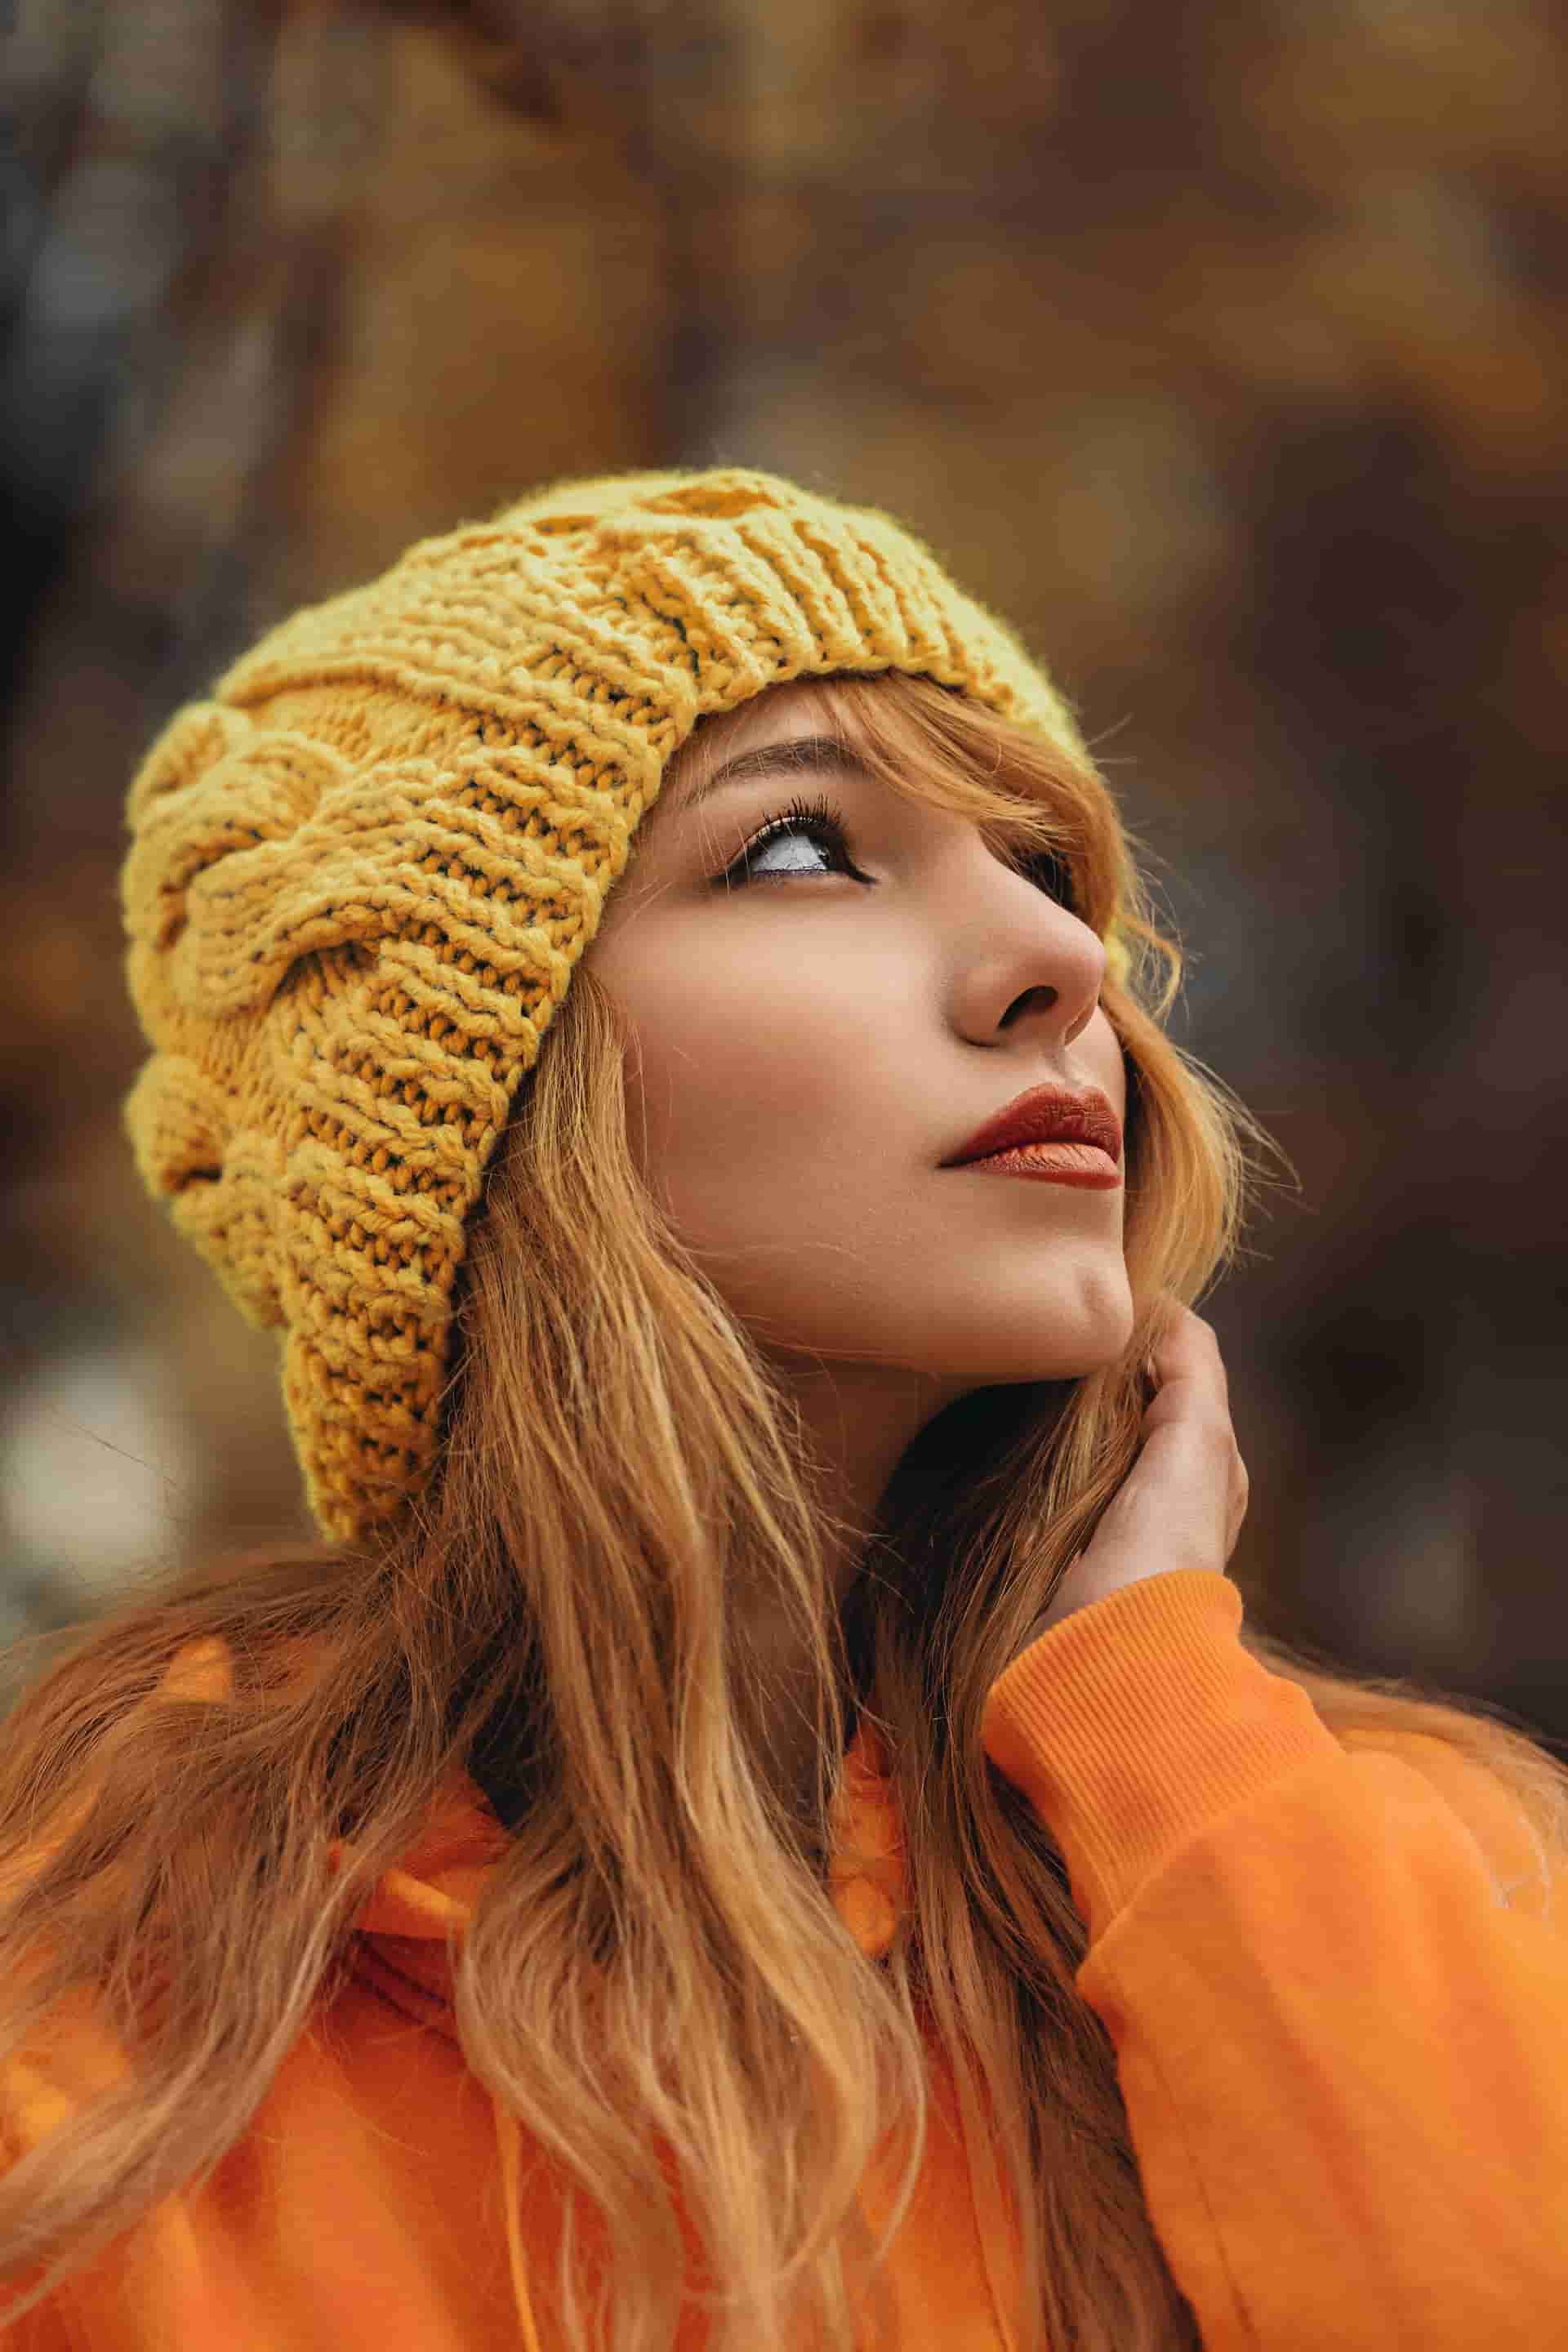 A woman wearing a yellow beanie hat